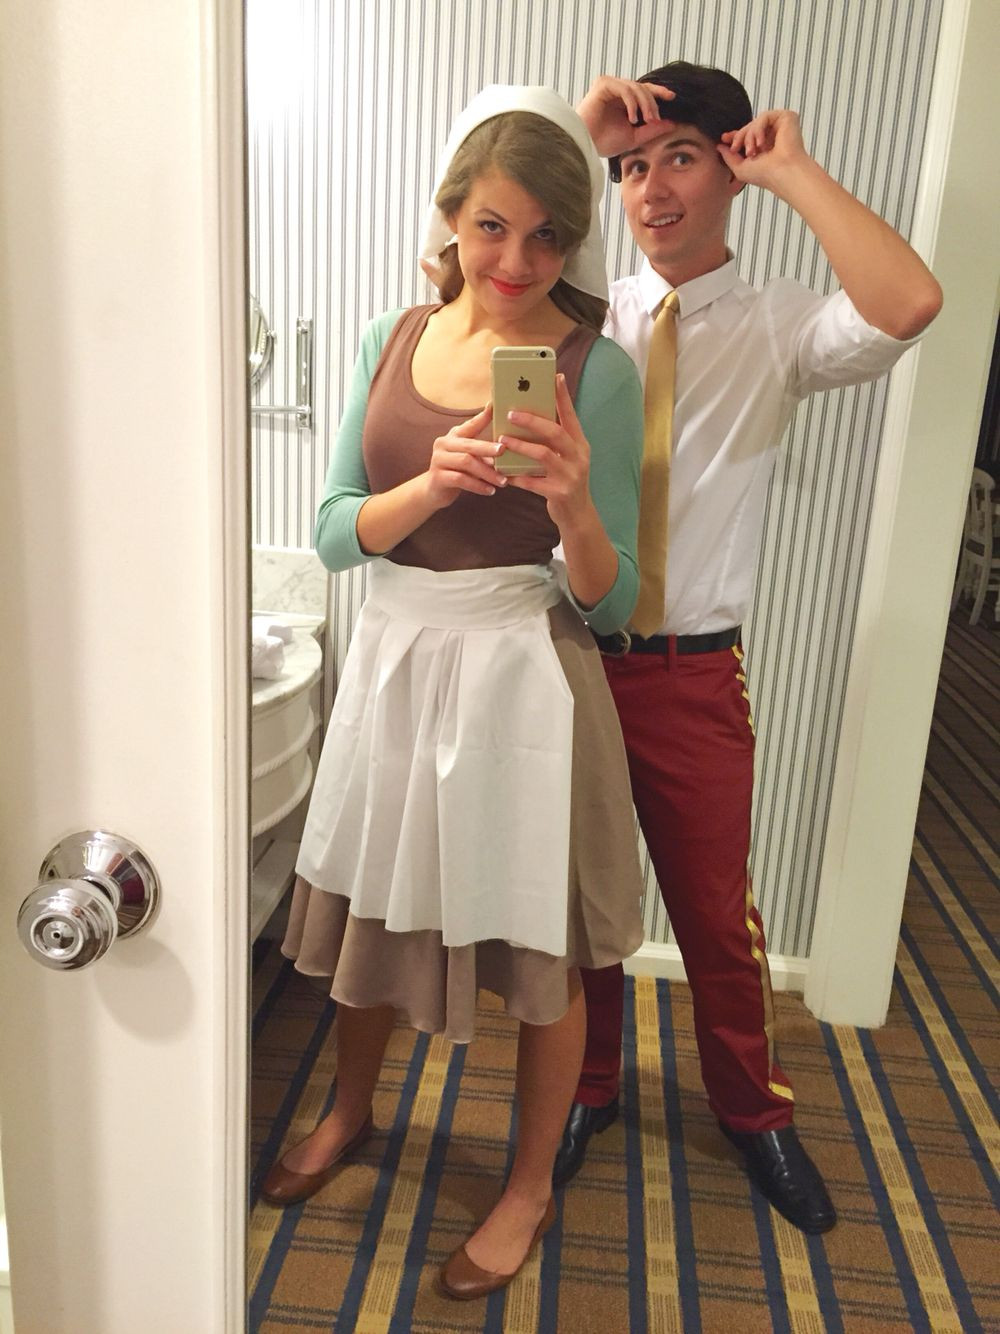 DIY Cinderella Costume For Adults
 Easy DIY Cinderella & Prince Charming couple costume All